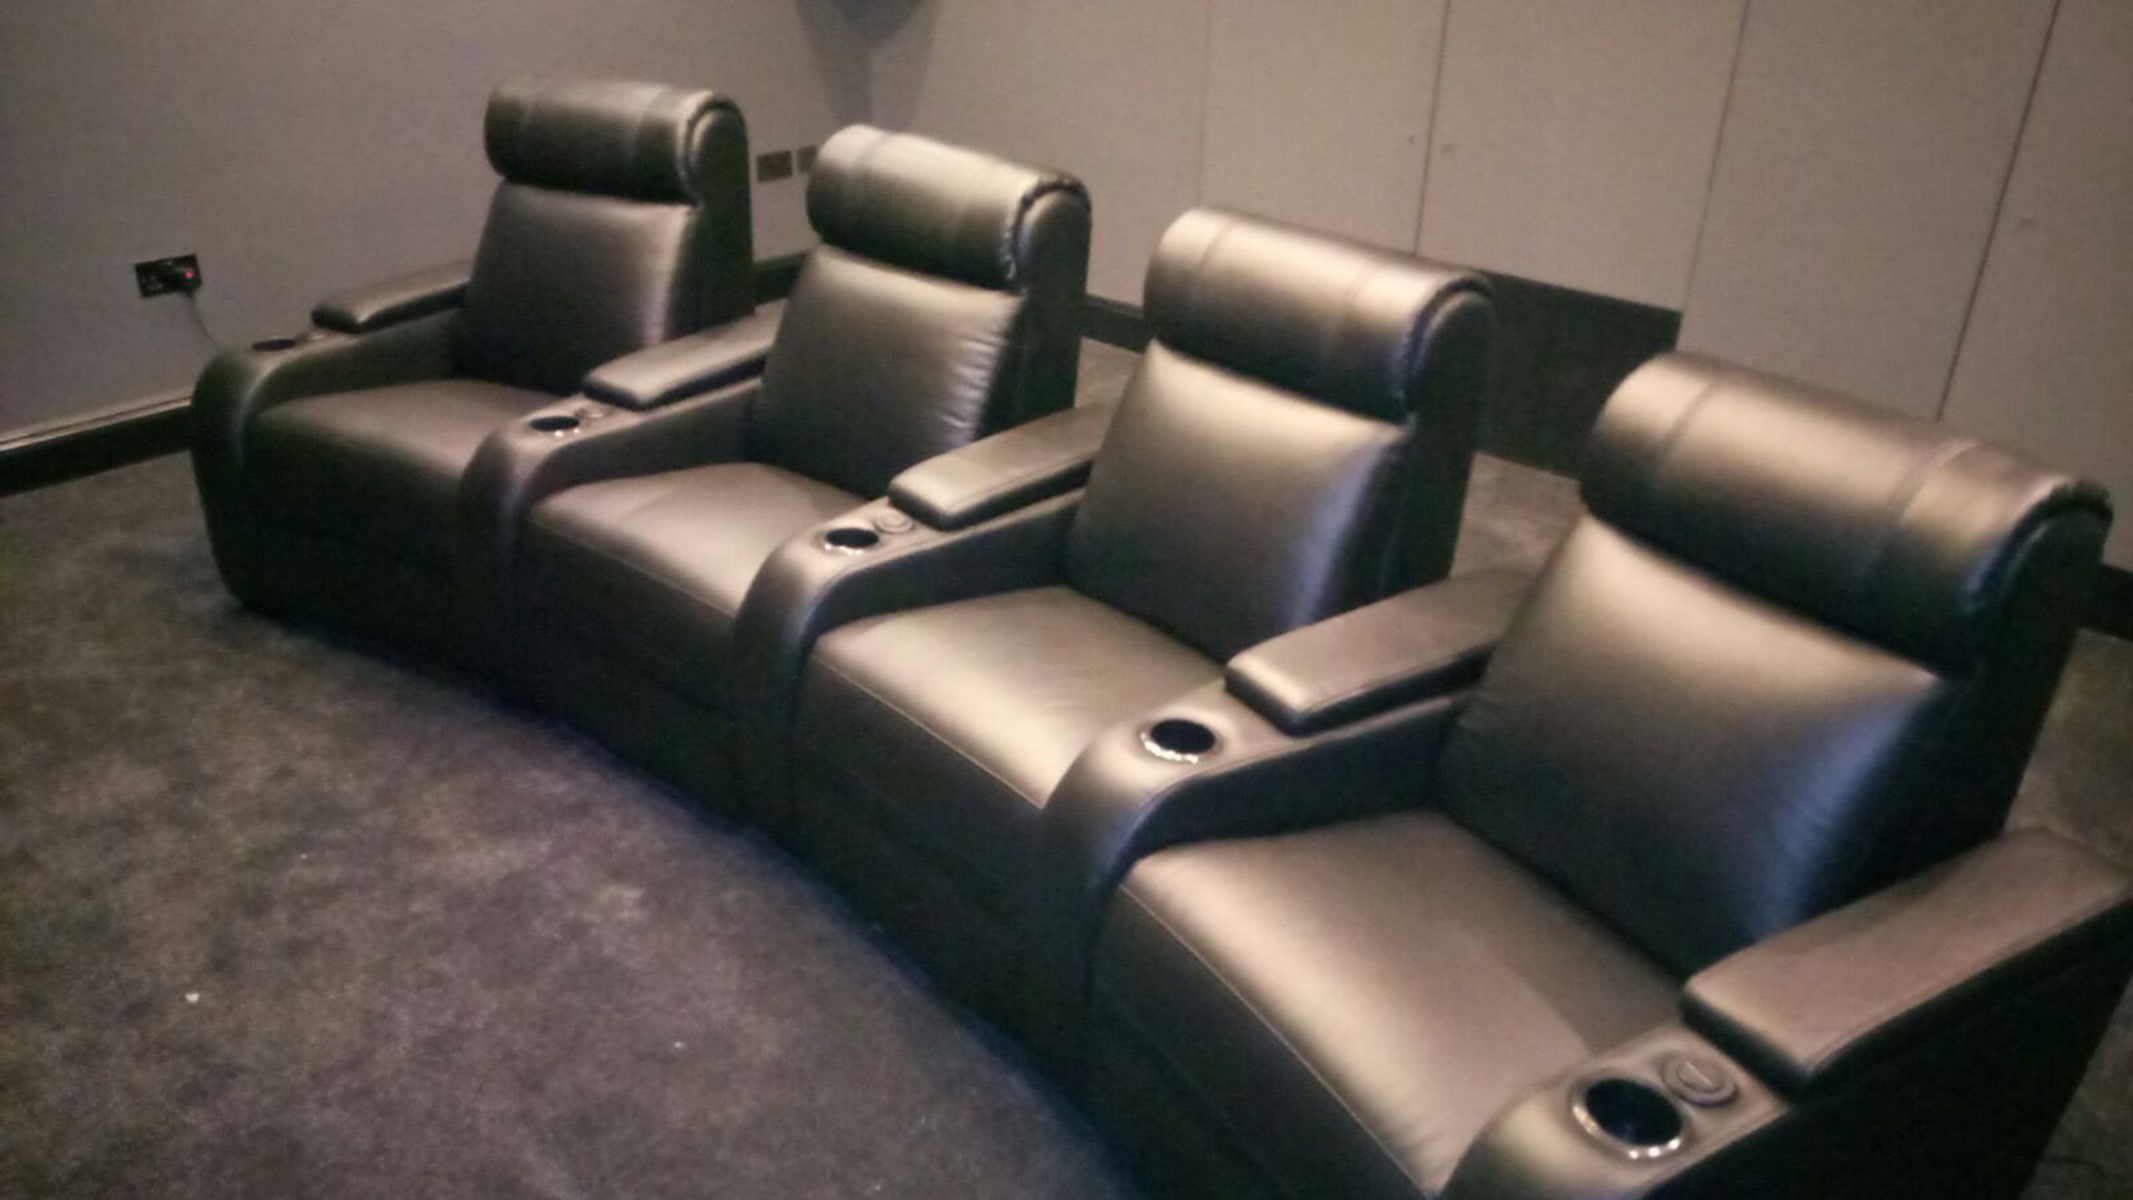 Paramount 4 Home Cinema Seating - curved